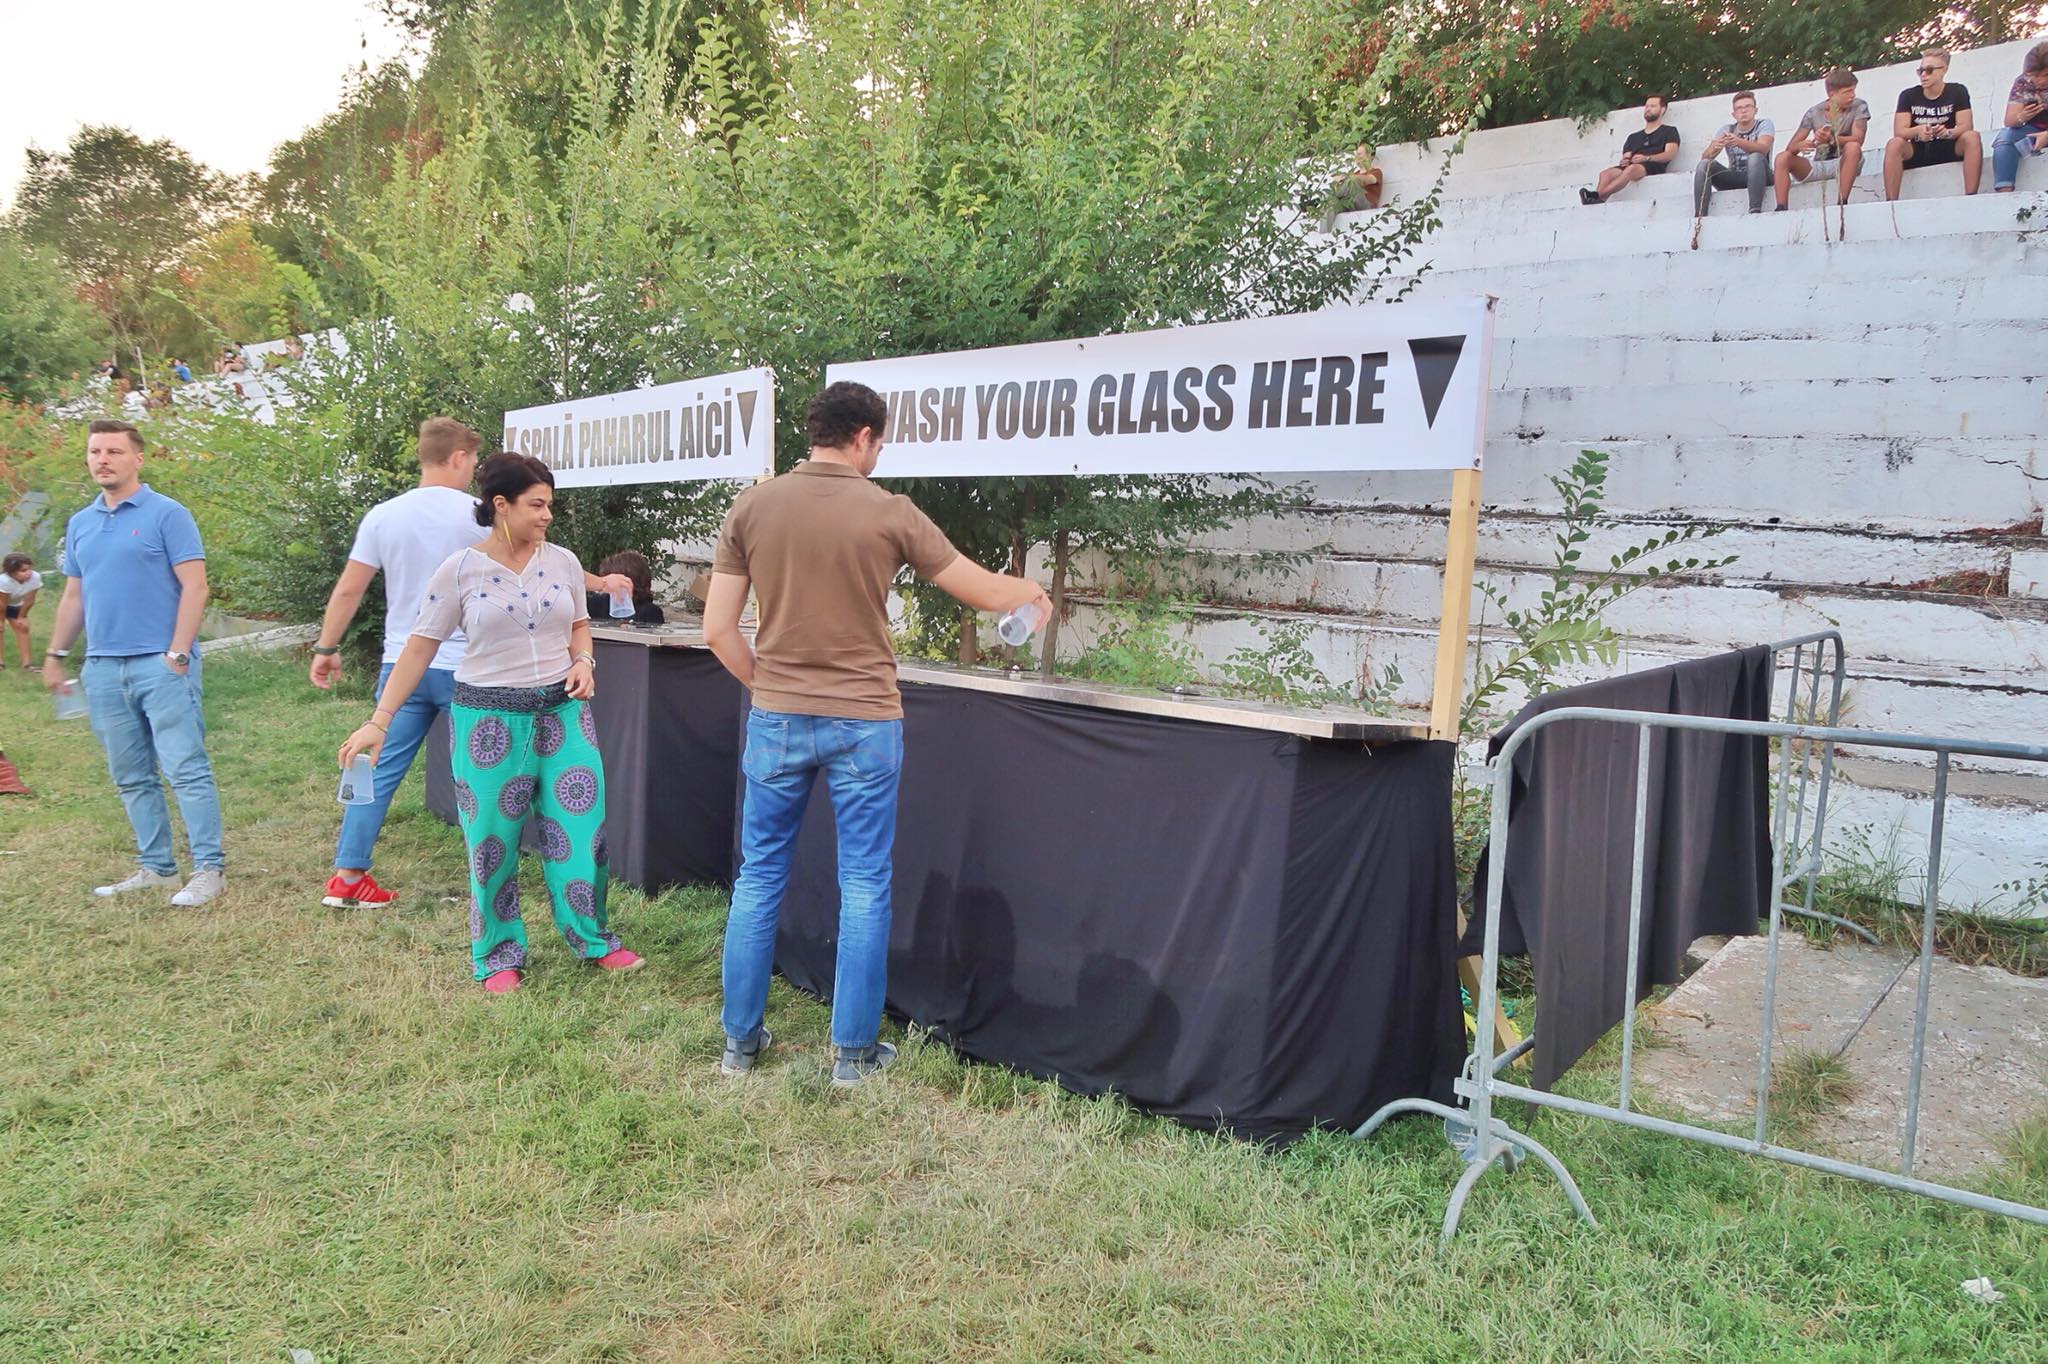 Kach Solo Travels Day 19: Sunday Fun- Attending the Craft Beer Festival in Bucharest, Romania